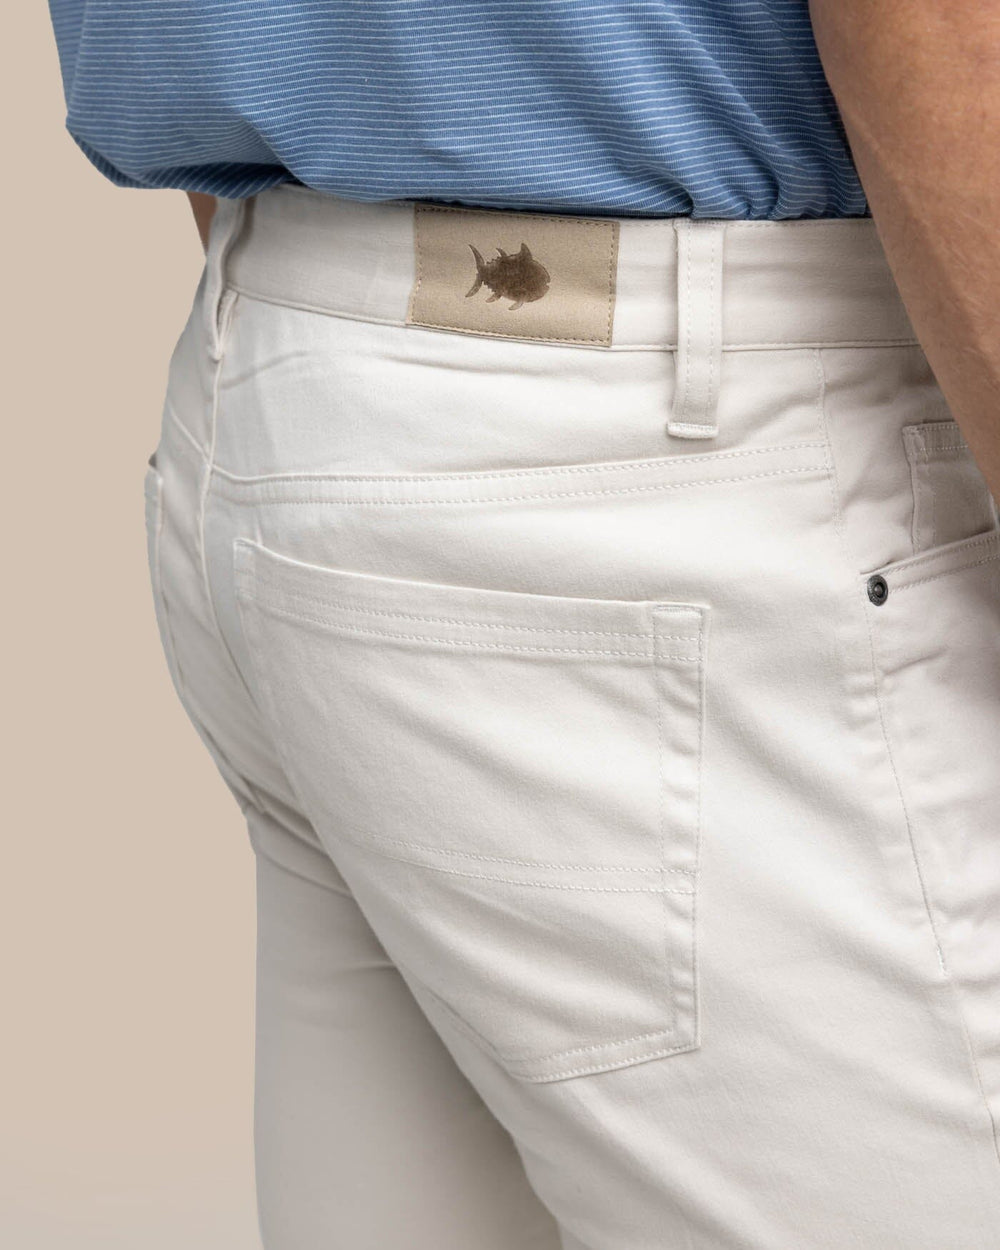 The detail view of the Southern Tide Sullivan Five Pocket Pant Stone by Southern Tide - Stone